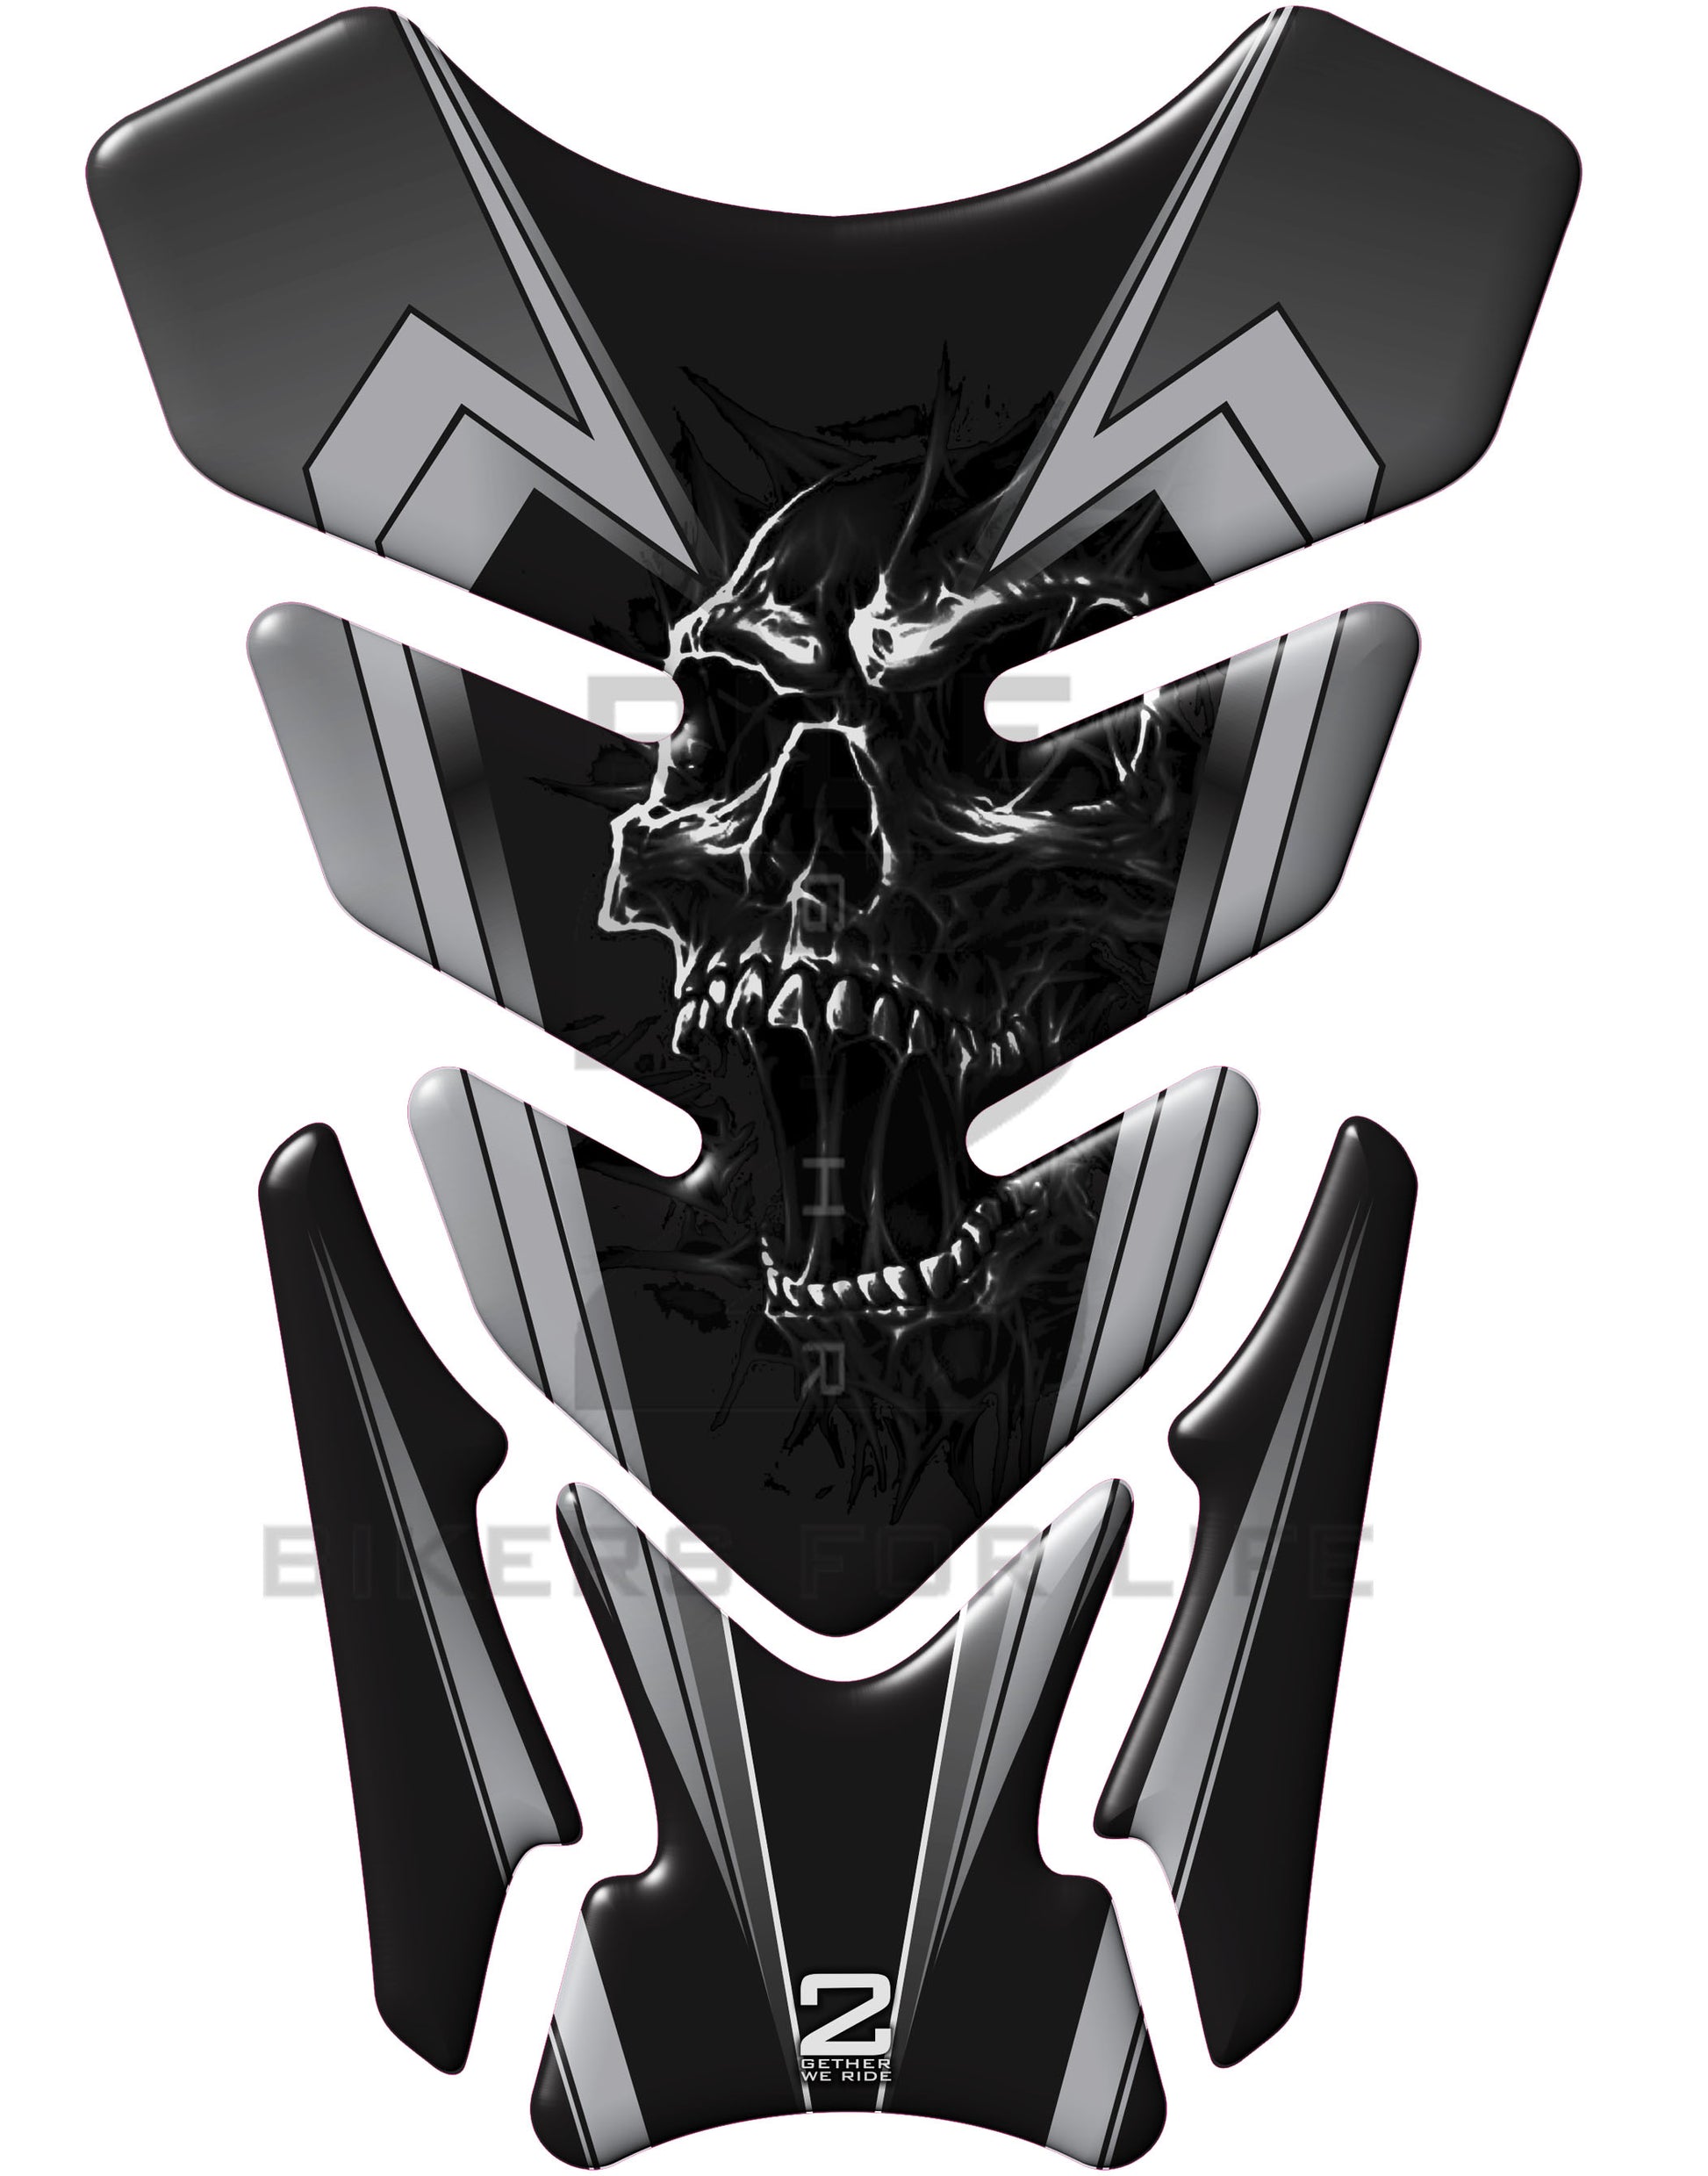 Universal Fit Black Screaming Skull Motor Bike Tank Pad Protector. A Street Pad which fits most motorcycles.